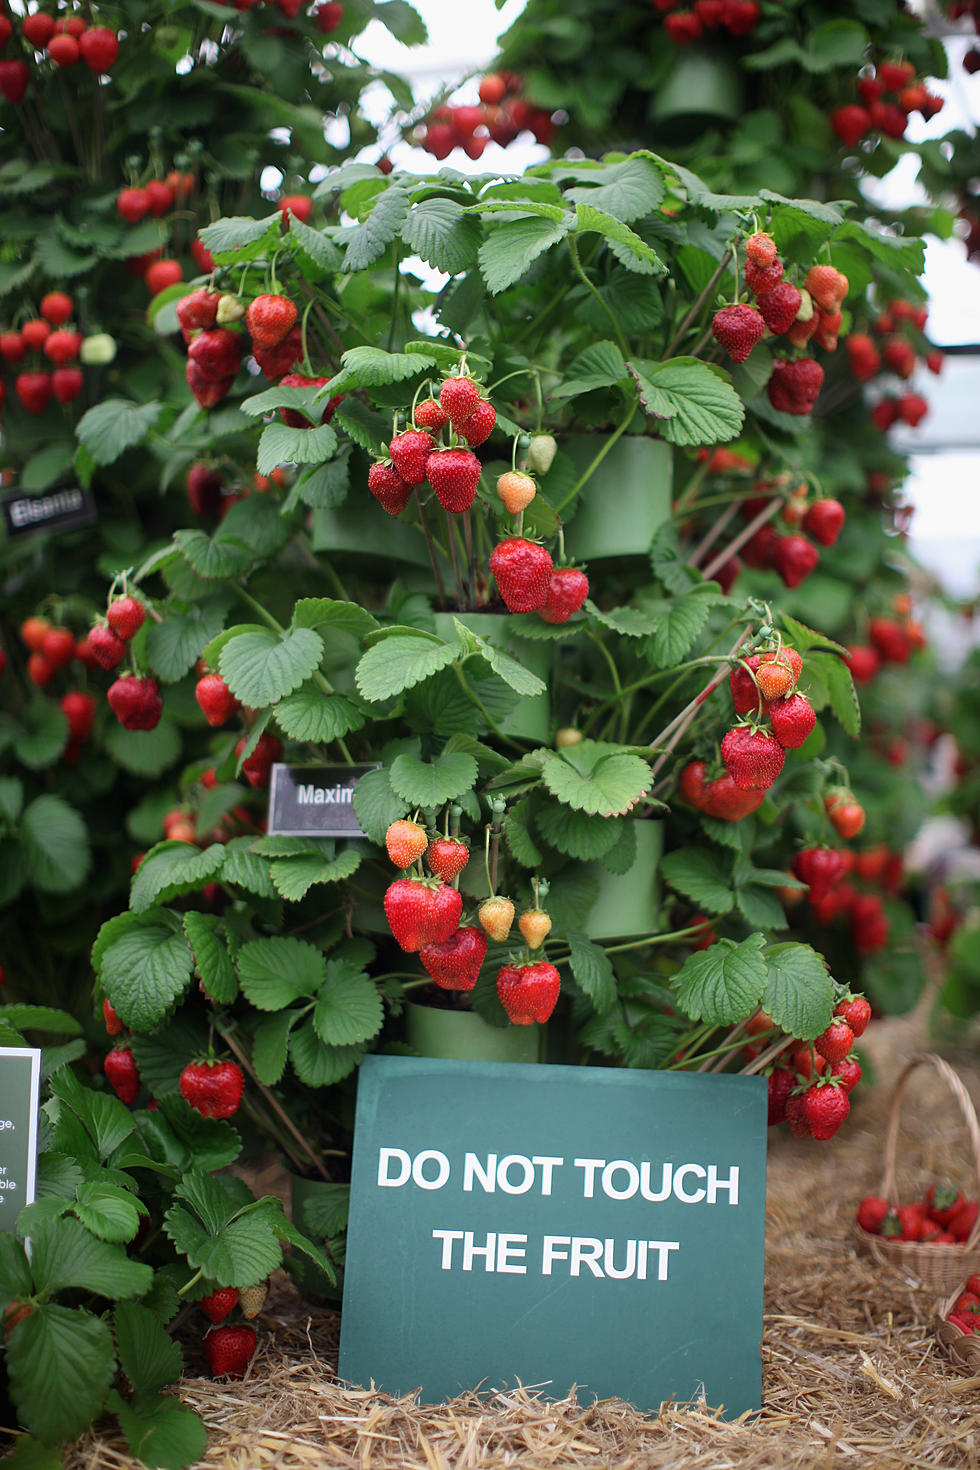 Garden Show Update - Take Care of the Berries